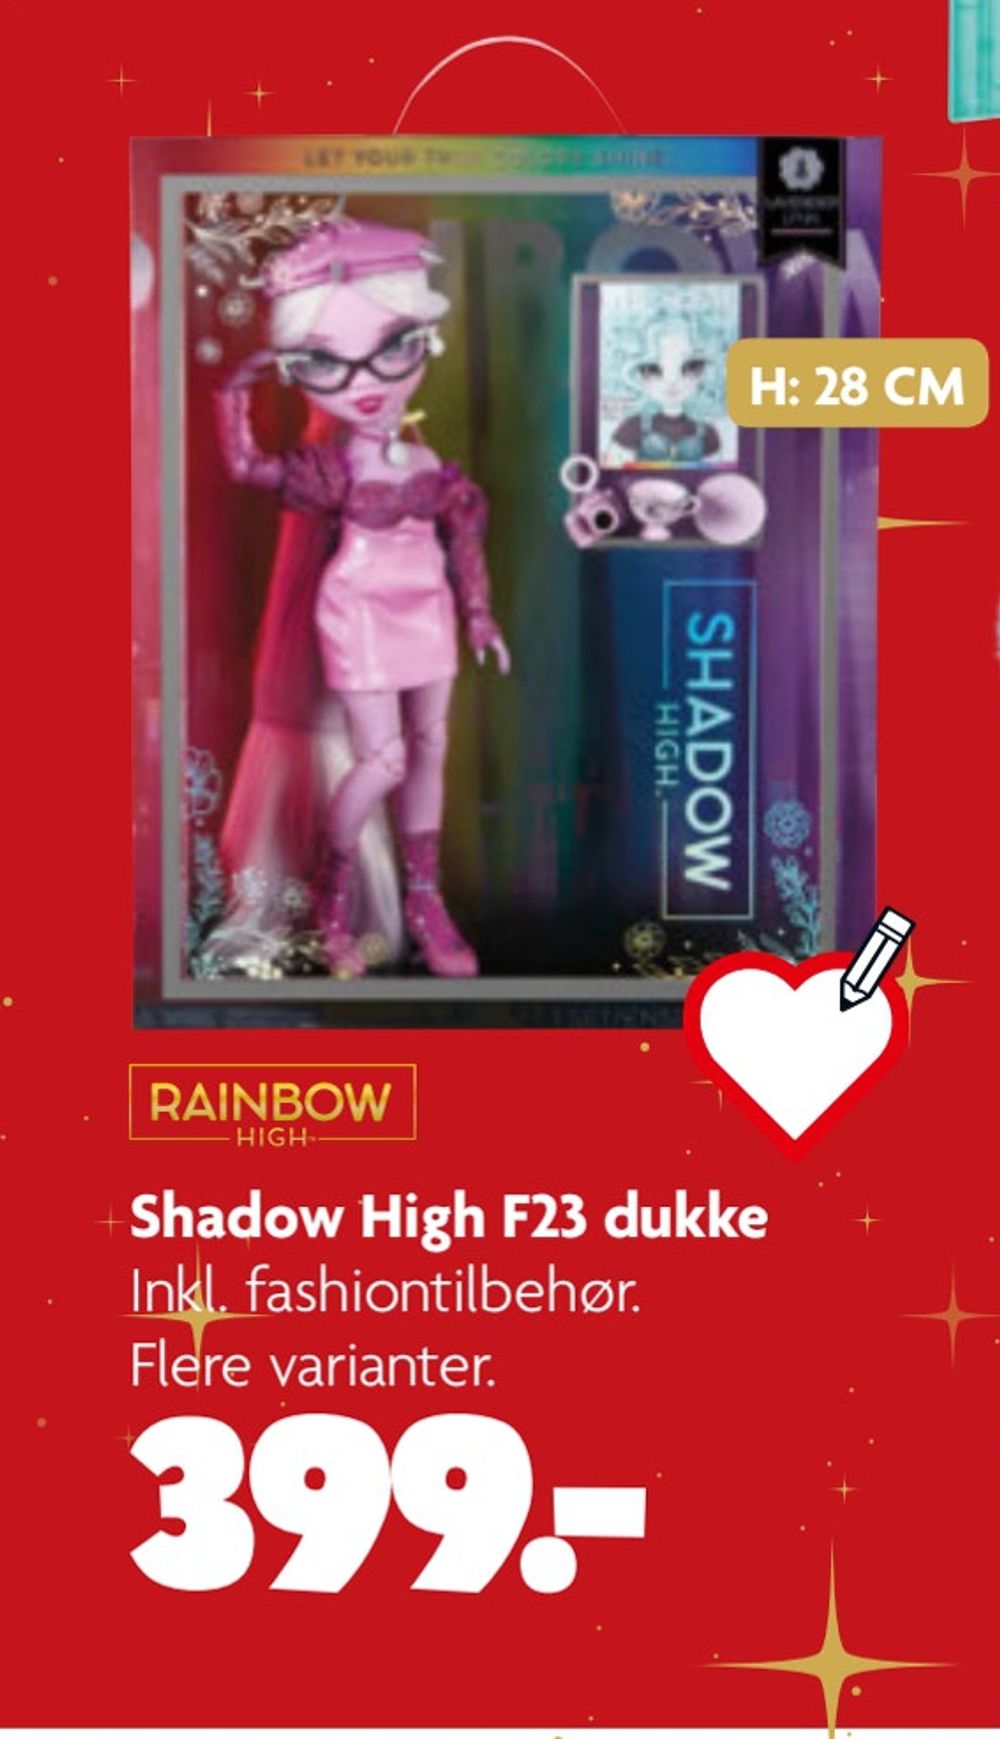 Deals on Shadow High F23 dukke from BR at 399 kr.